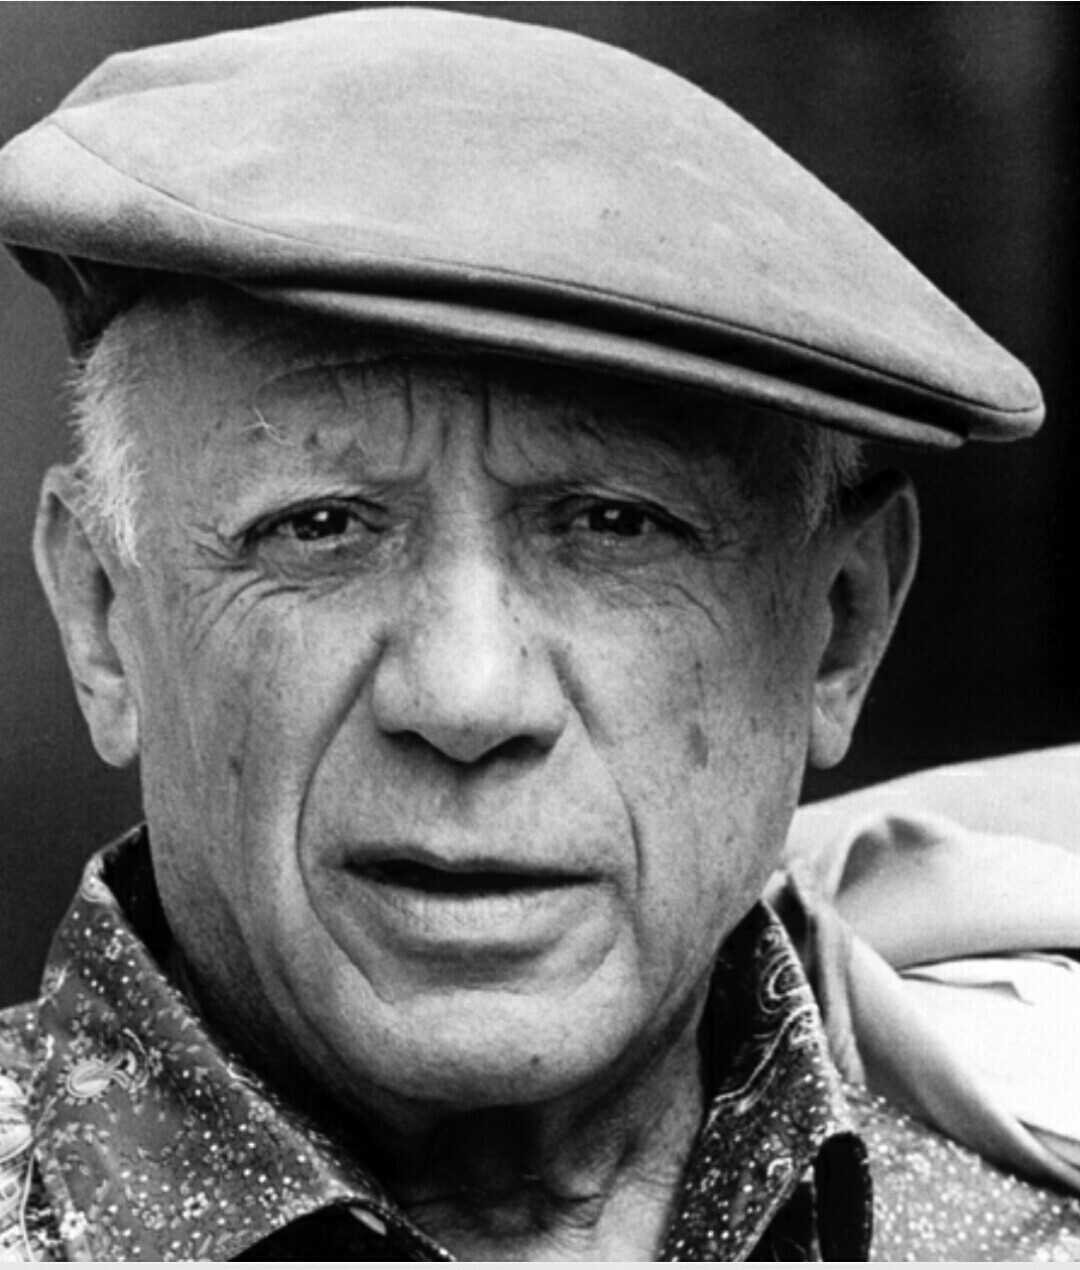 THE MASTER HIMSELF. The Spanish artist Pablo Picasso. (You might have heard of him.)